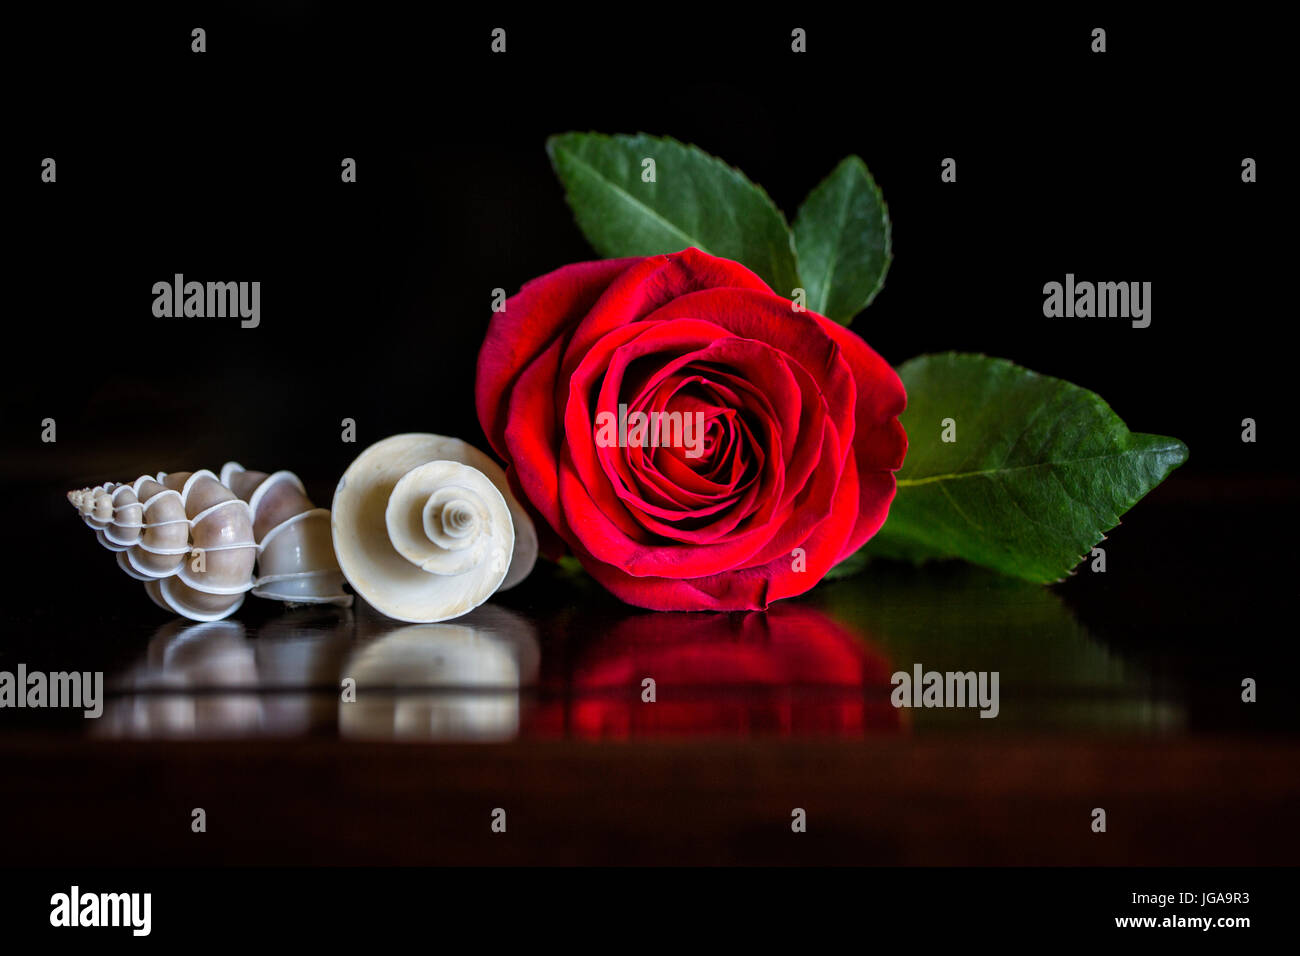 A Red Rose with a Precious Wentletrap and Thatcheria Shell displaying spires and spirals of nature in a still life on a wood table. Stock Photo